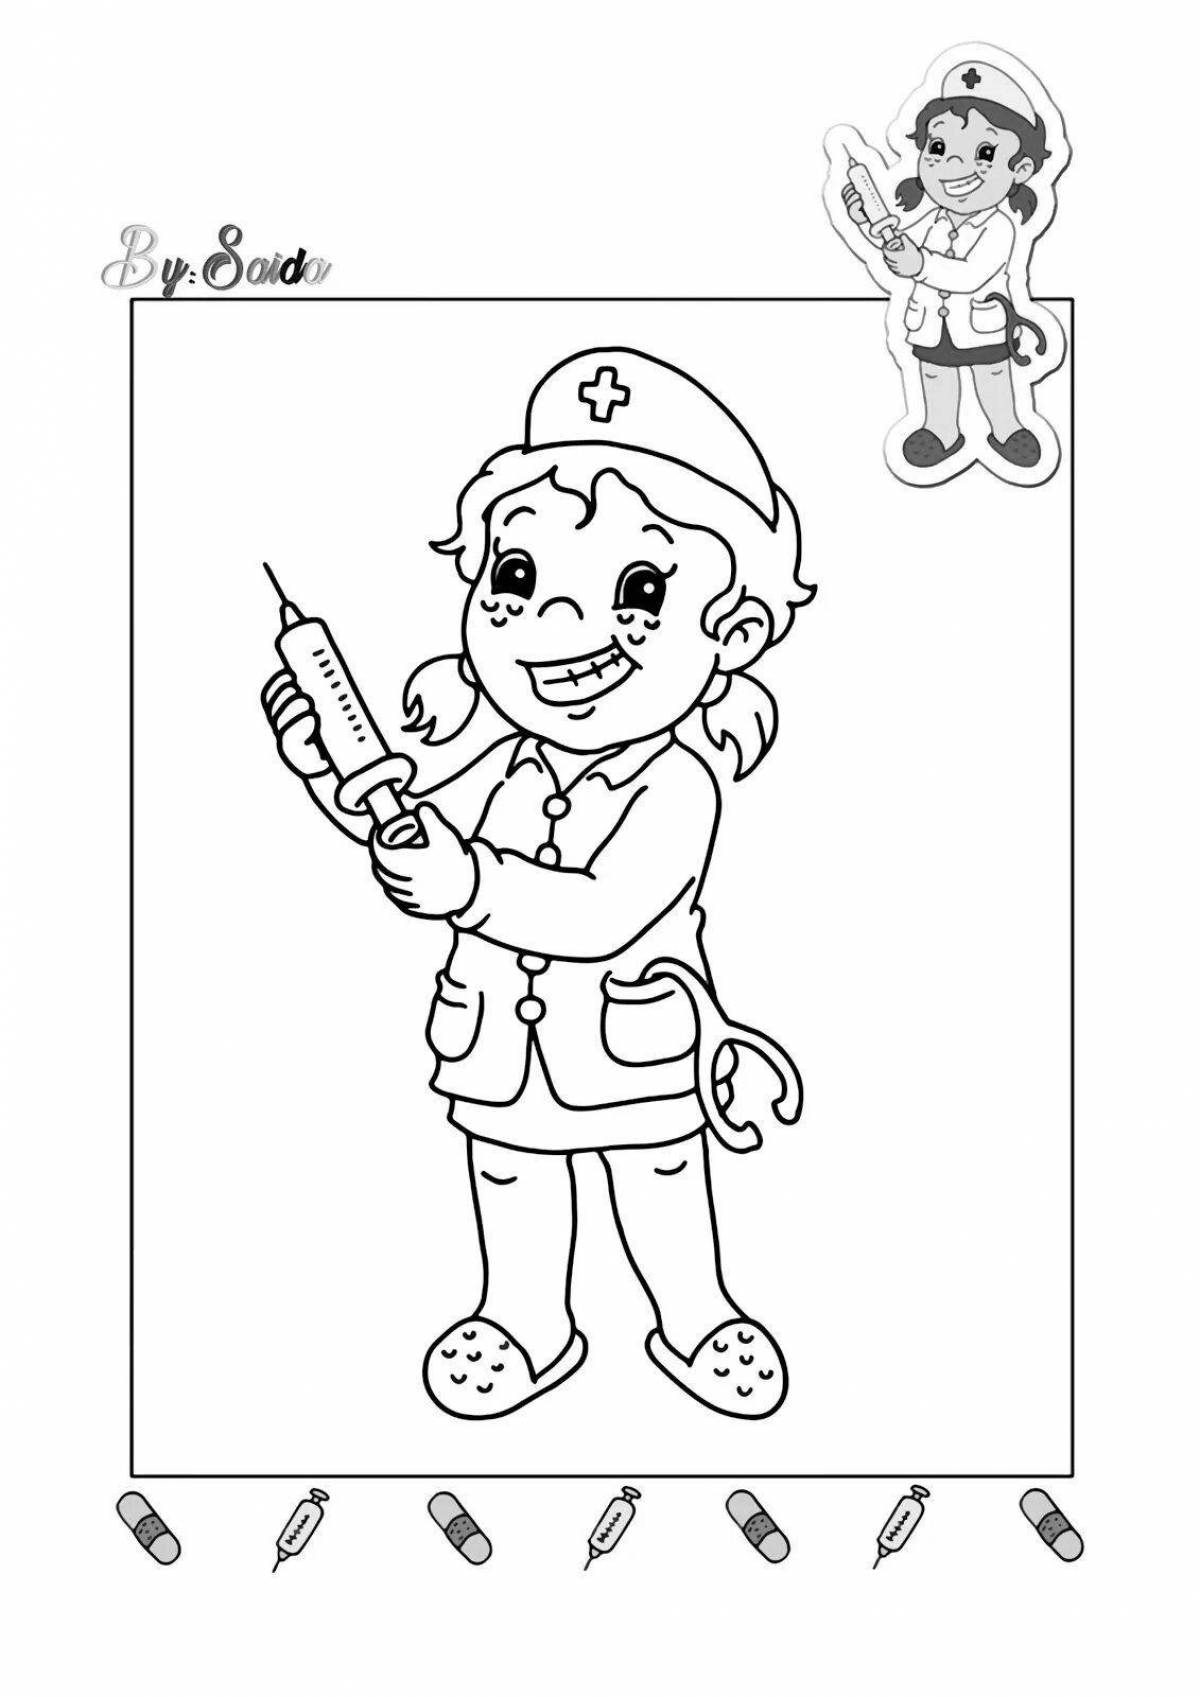 Exciting job coloring pages